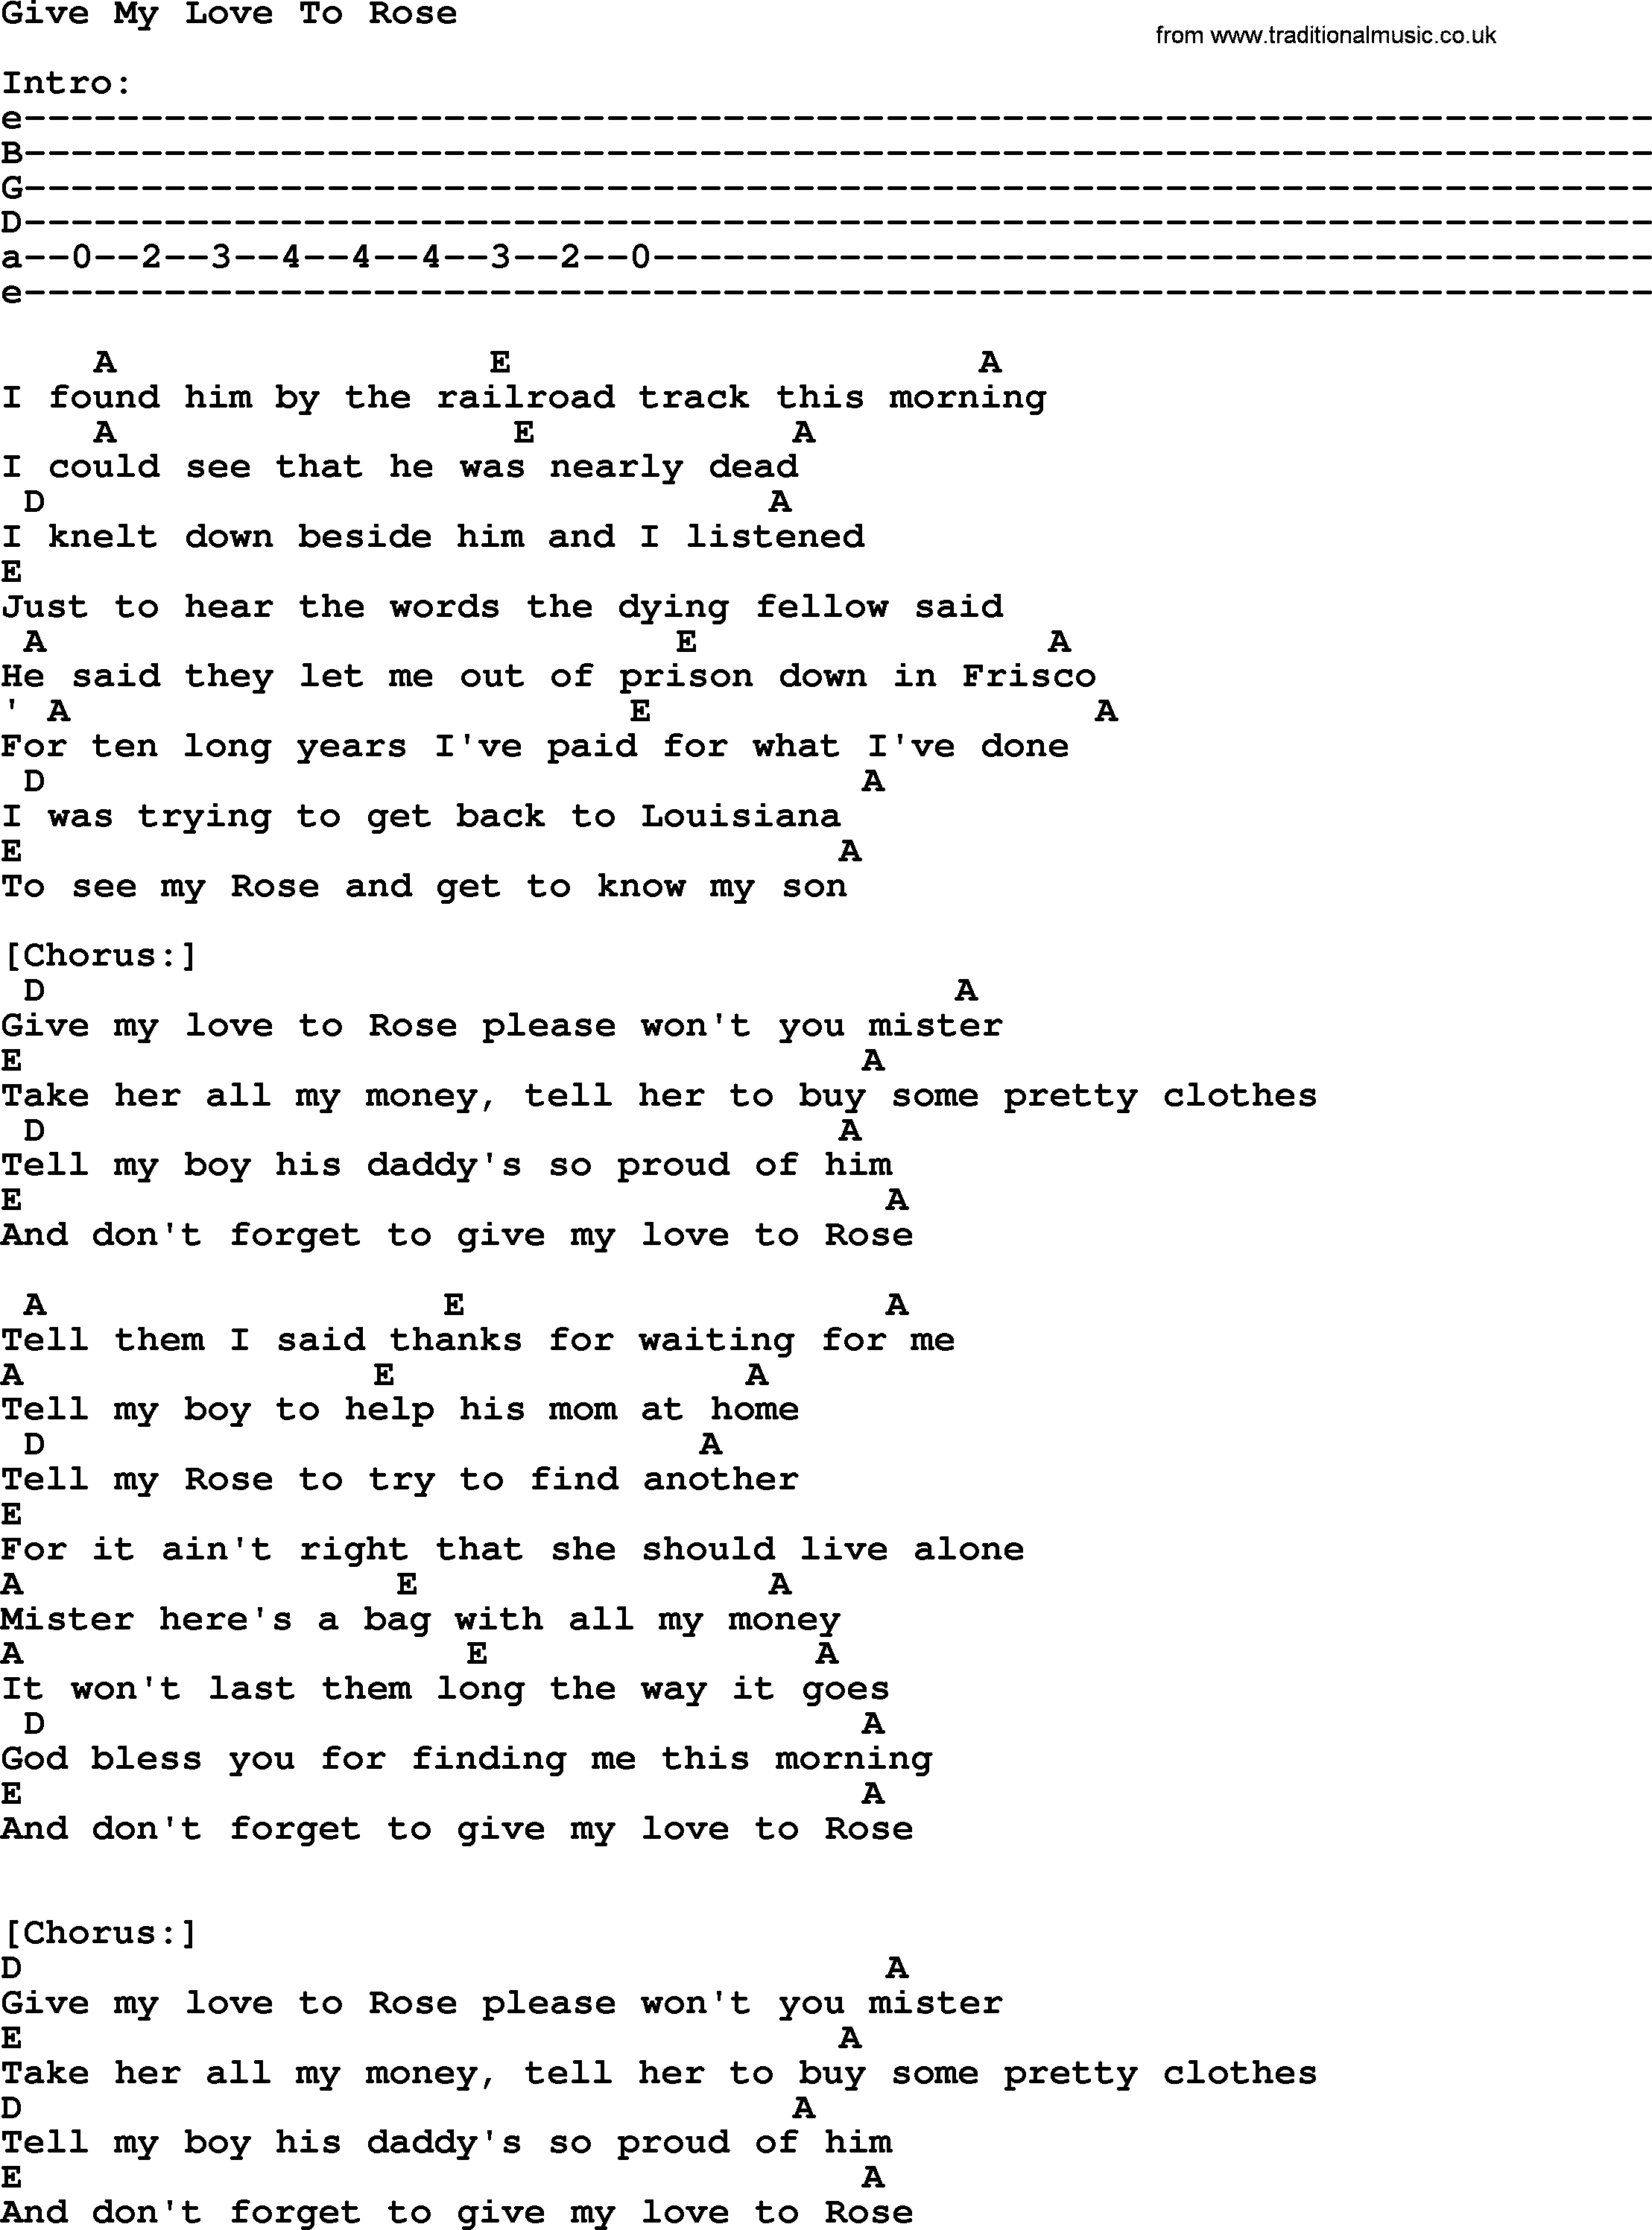 Johnny Cash song: Give My Love To Rose, lyrics and chords